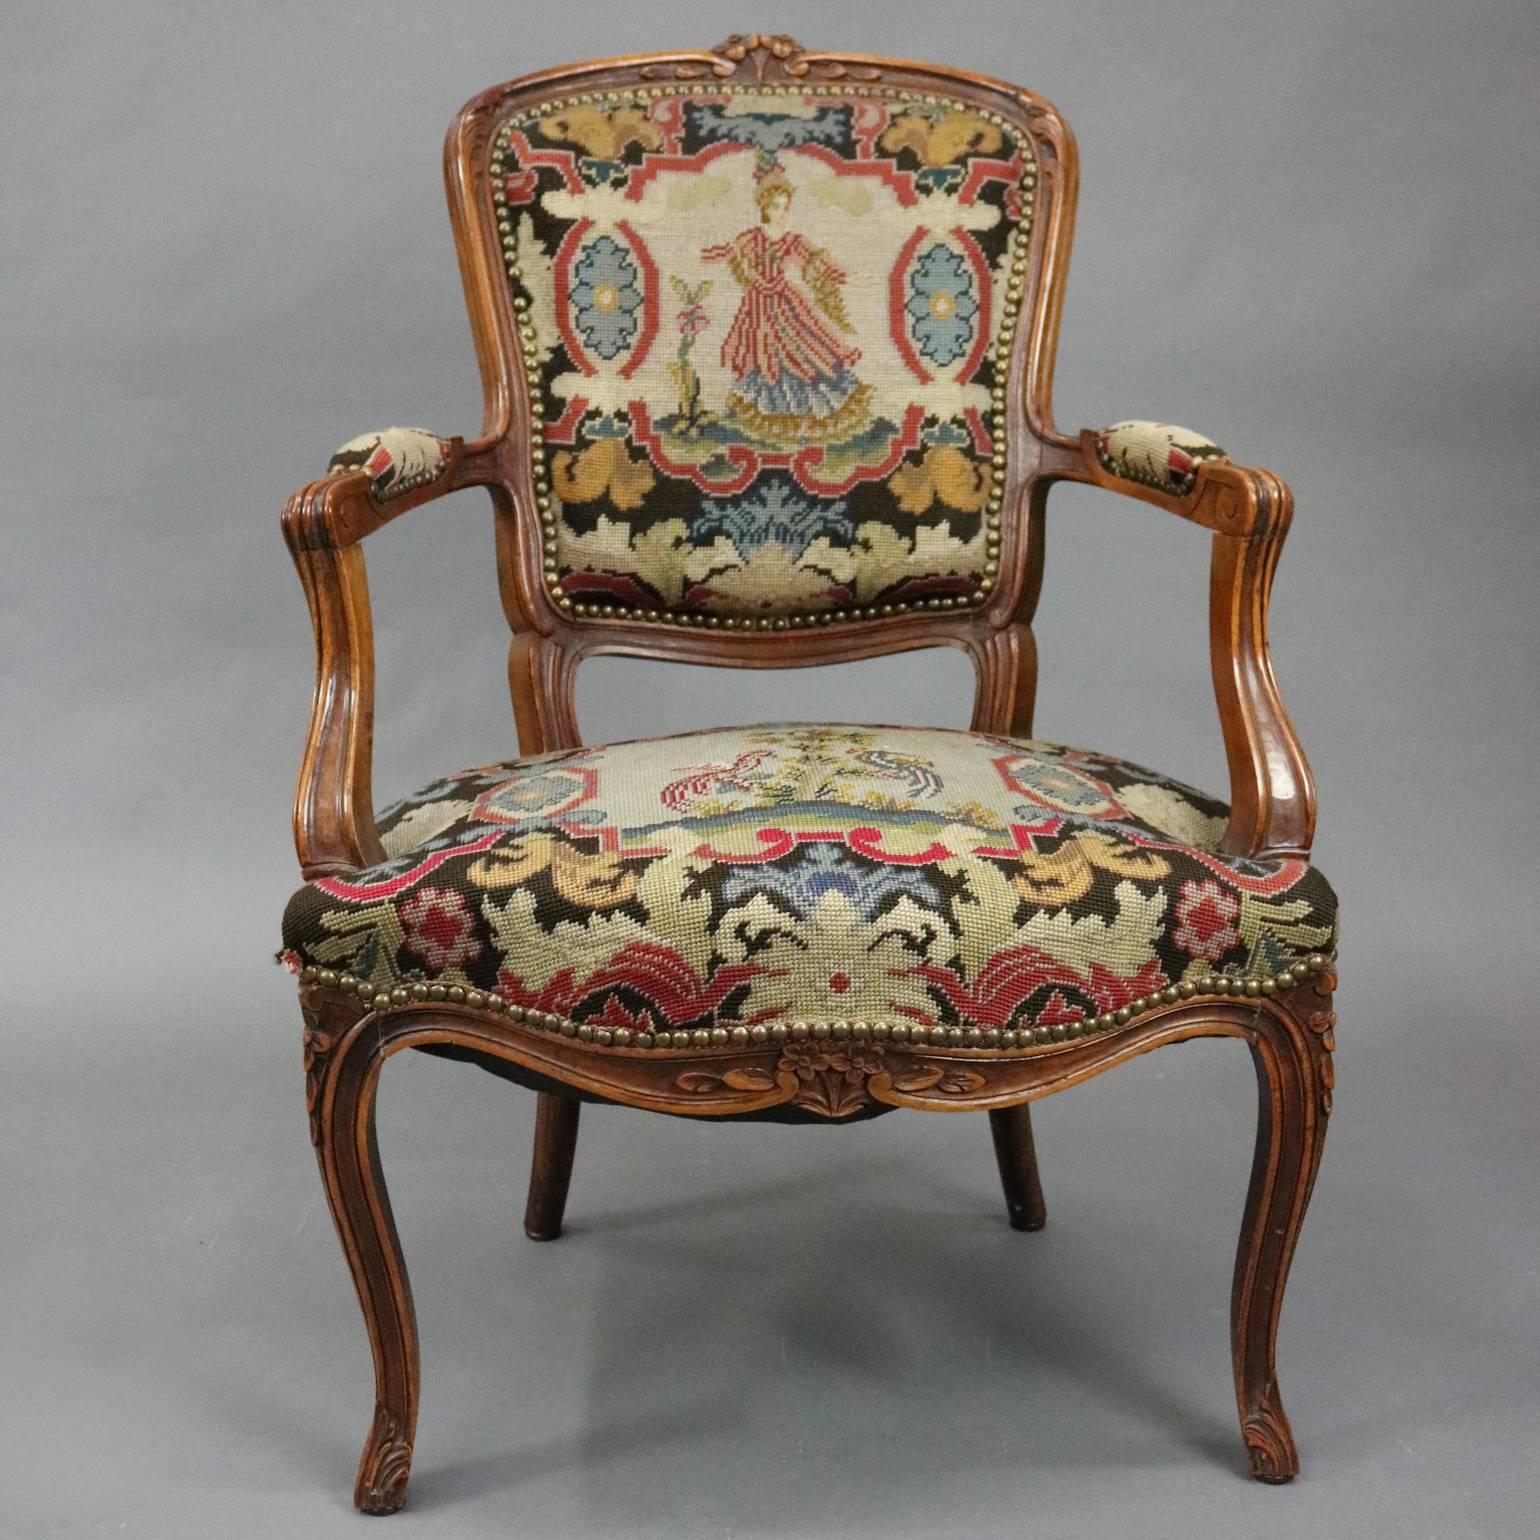 Vintage French, Louis XV classical style carved fruitwood tapestry upholstered arm chair features central design of dancing maiden on back and pair of birds in tree on seat both bordered in acanthus foliate patterning, circa 1940.

Measures: 39